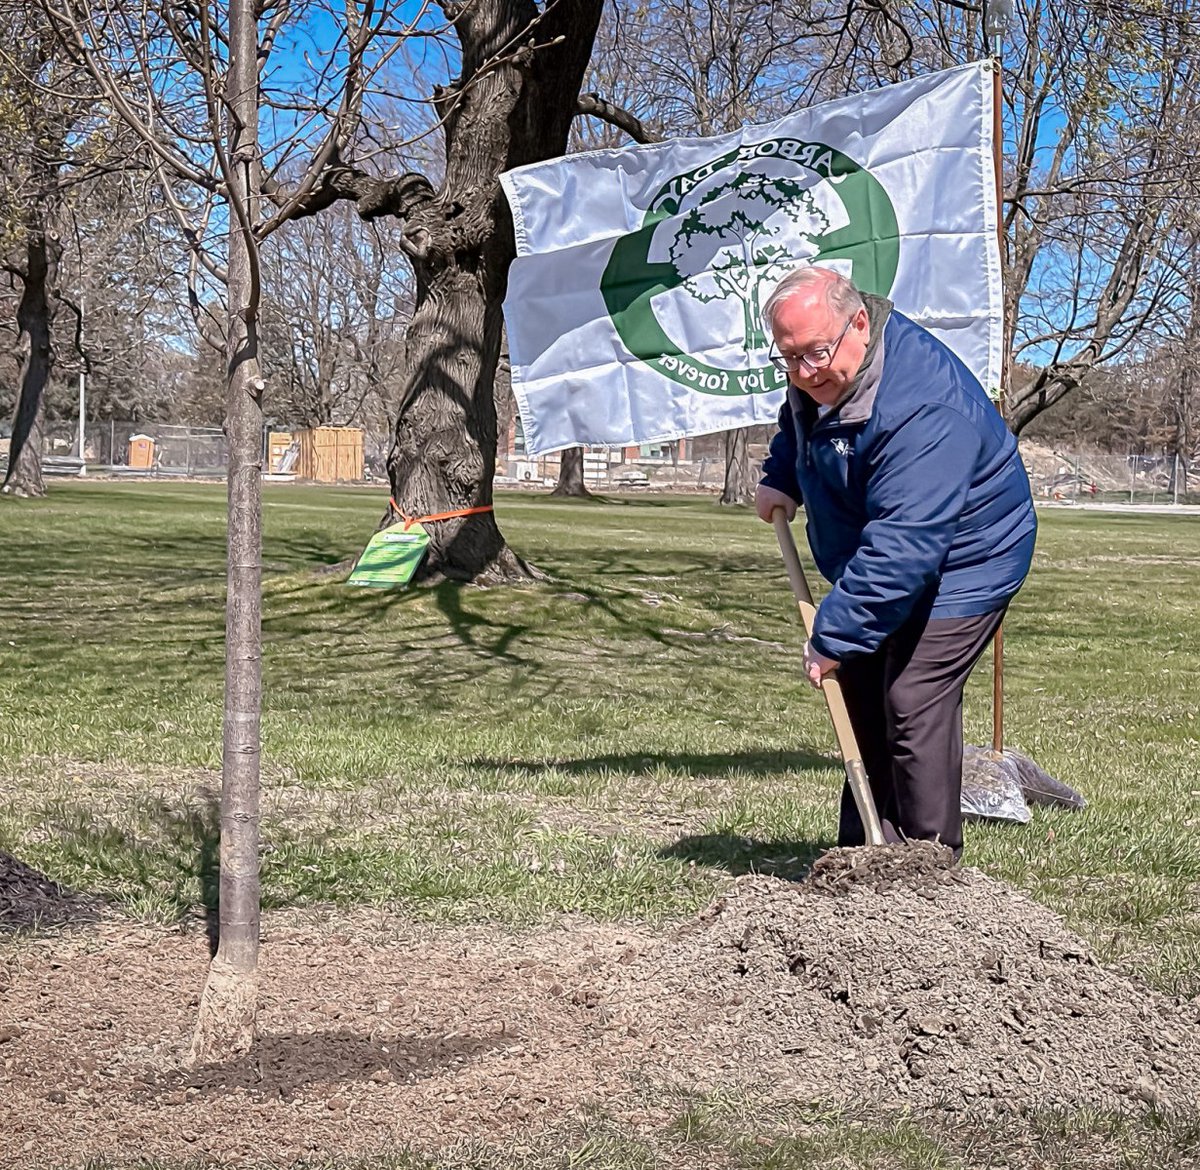 To mark Earth Week & DOH’s commitment to protecting public health by supporting efforts to promote cleaner air & water, .@NYHealthCommish & Exec Dep Commish Johanne Morne planted trees at the future site of the Wadsworth Lab & at University at Albany. health.ny.gov/press/releases…